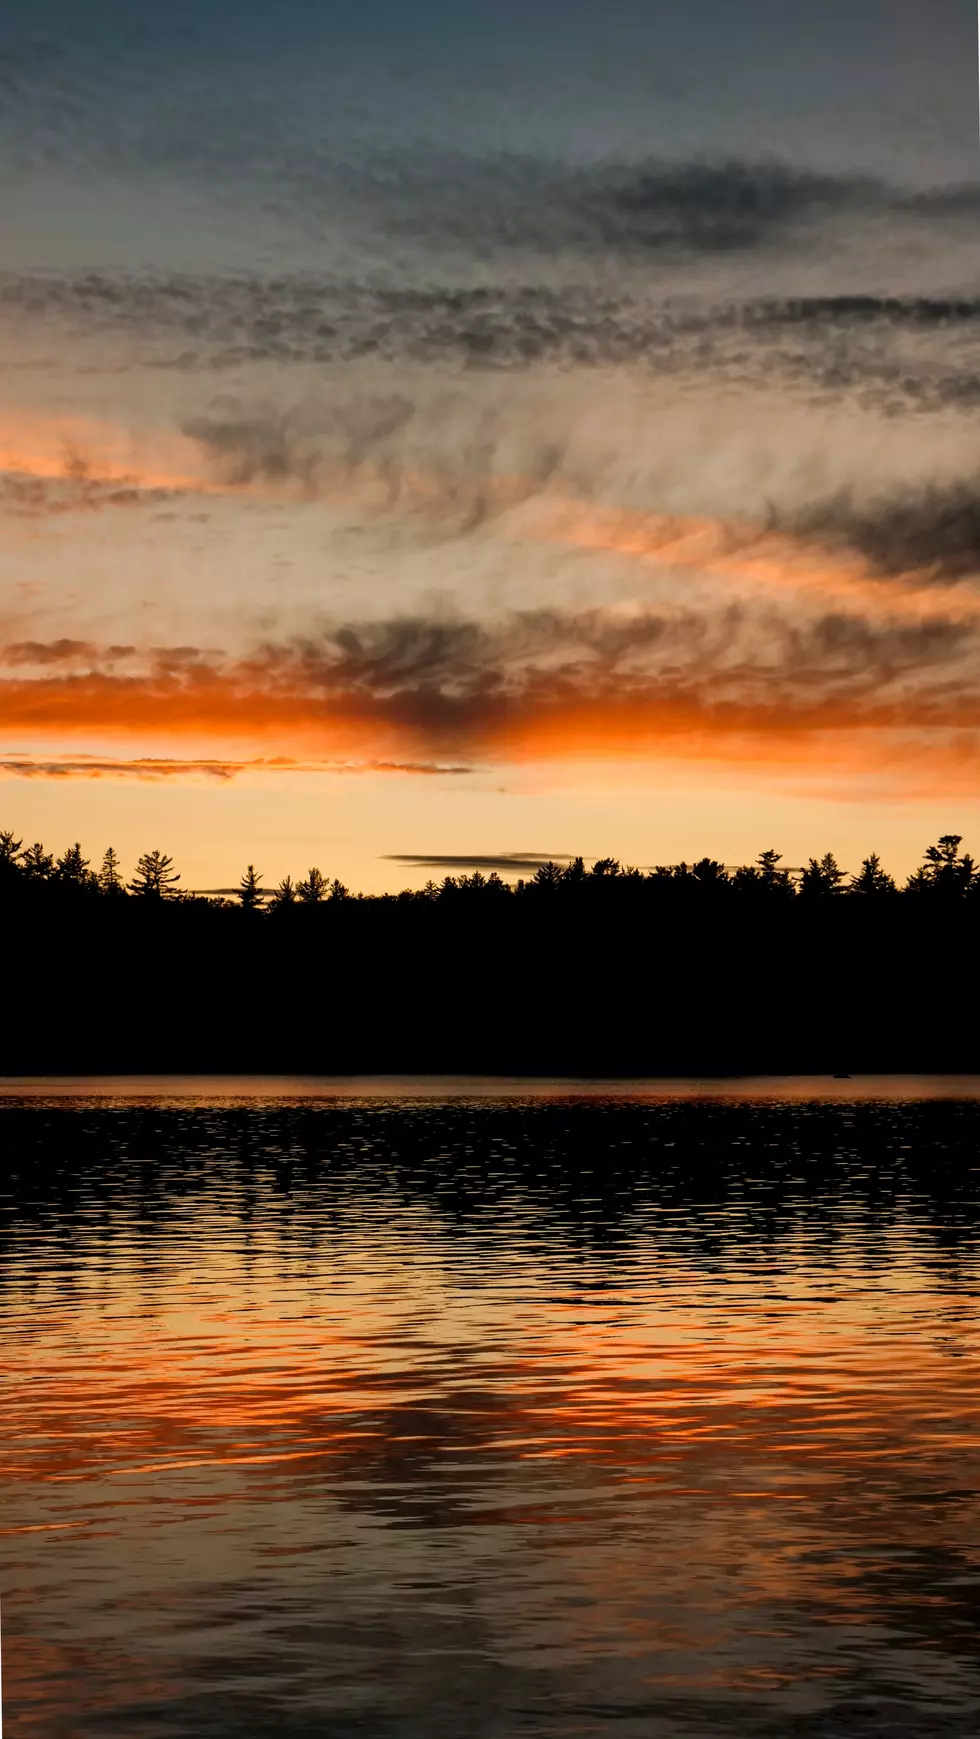 Woman Reports Bigfoot Sighting in the Boundary Waters of Northern Minnesota